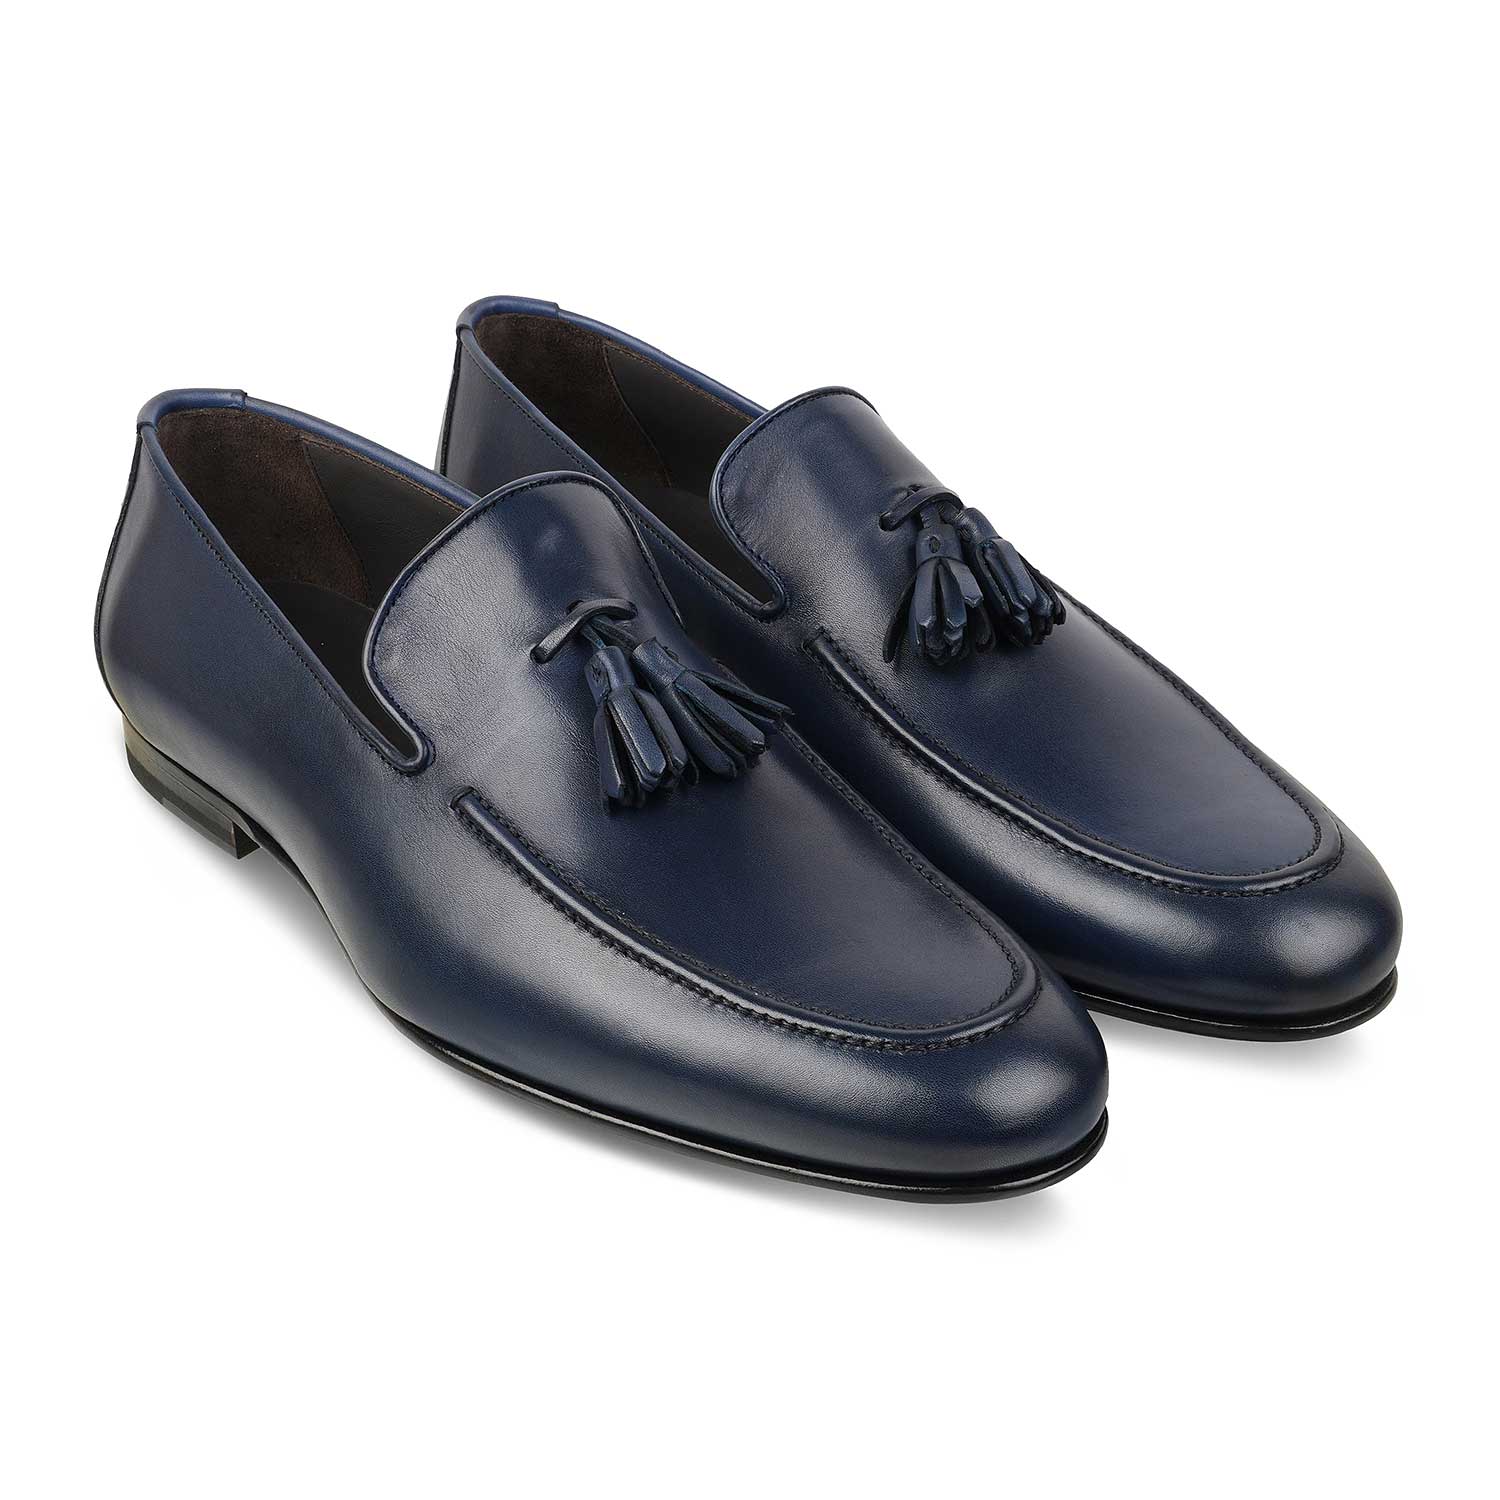 The Mancio Blue Men's Handcrafted Leather Loafers Tresmode